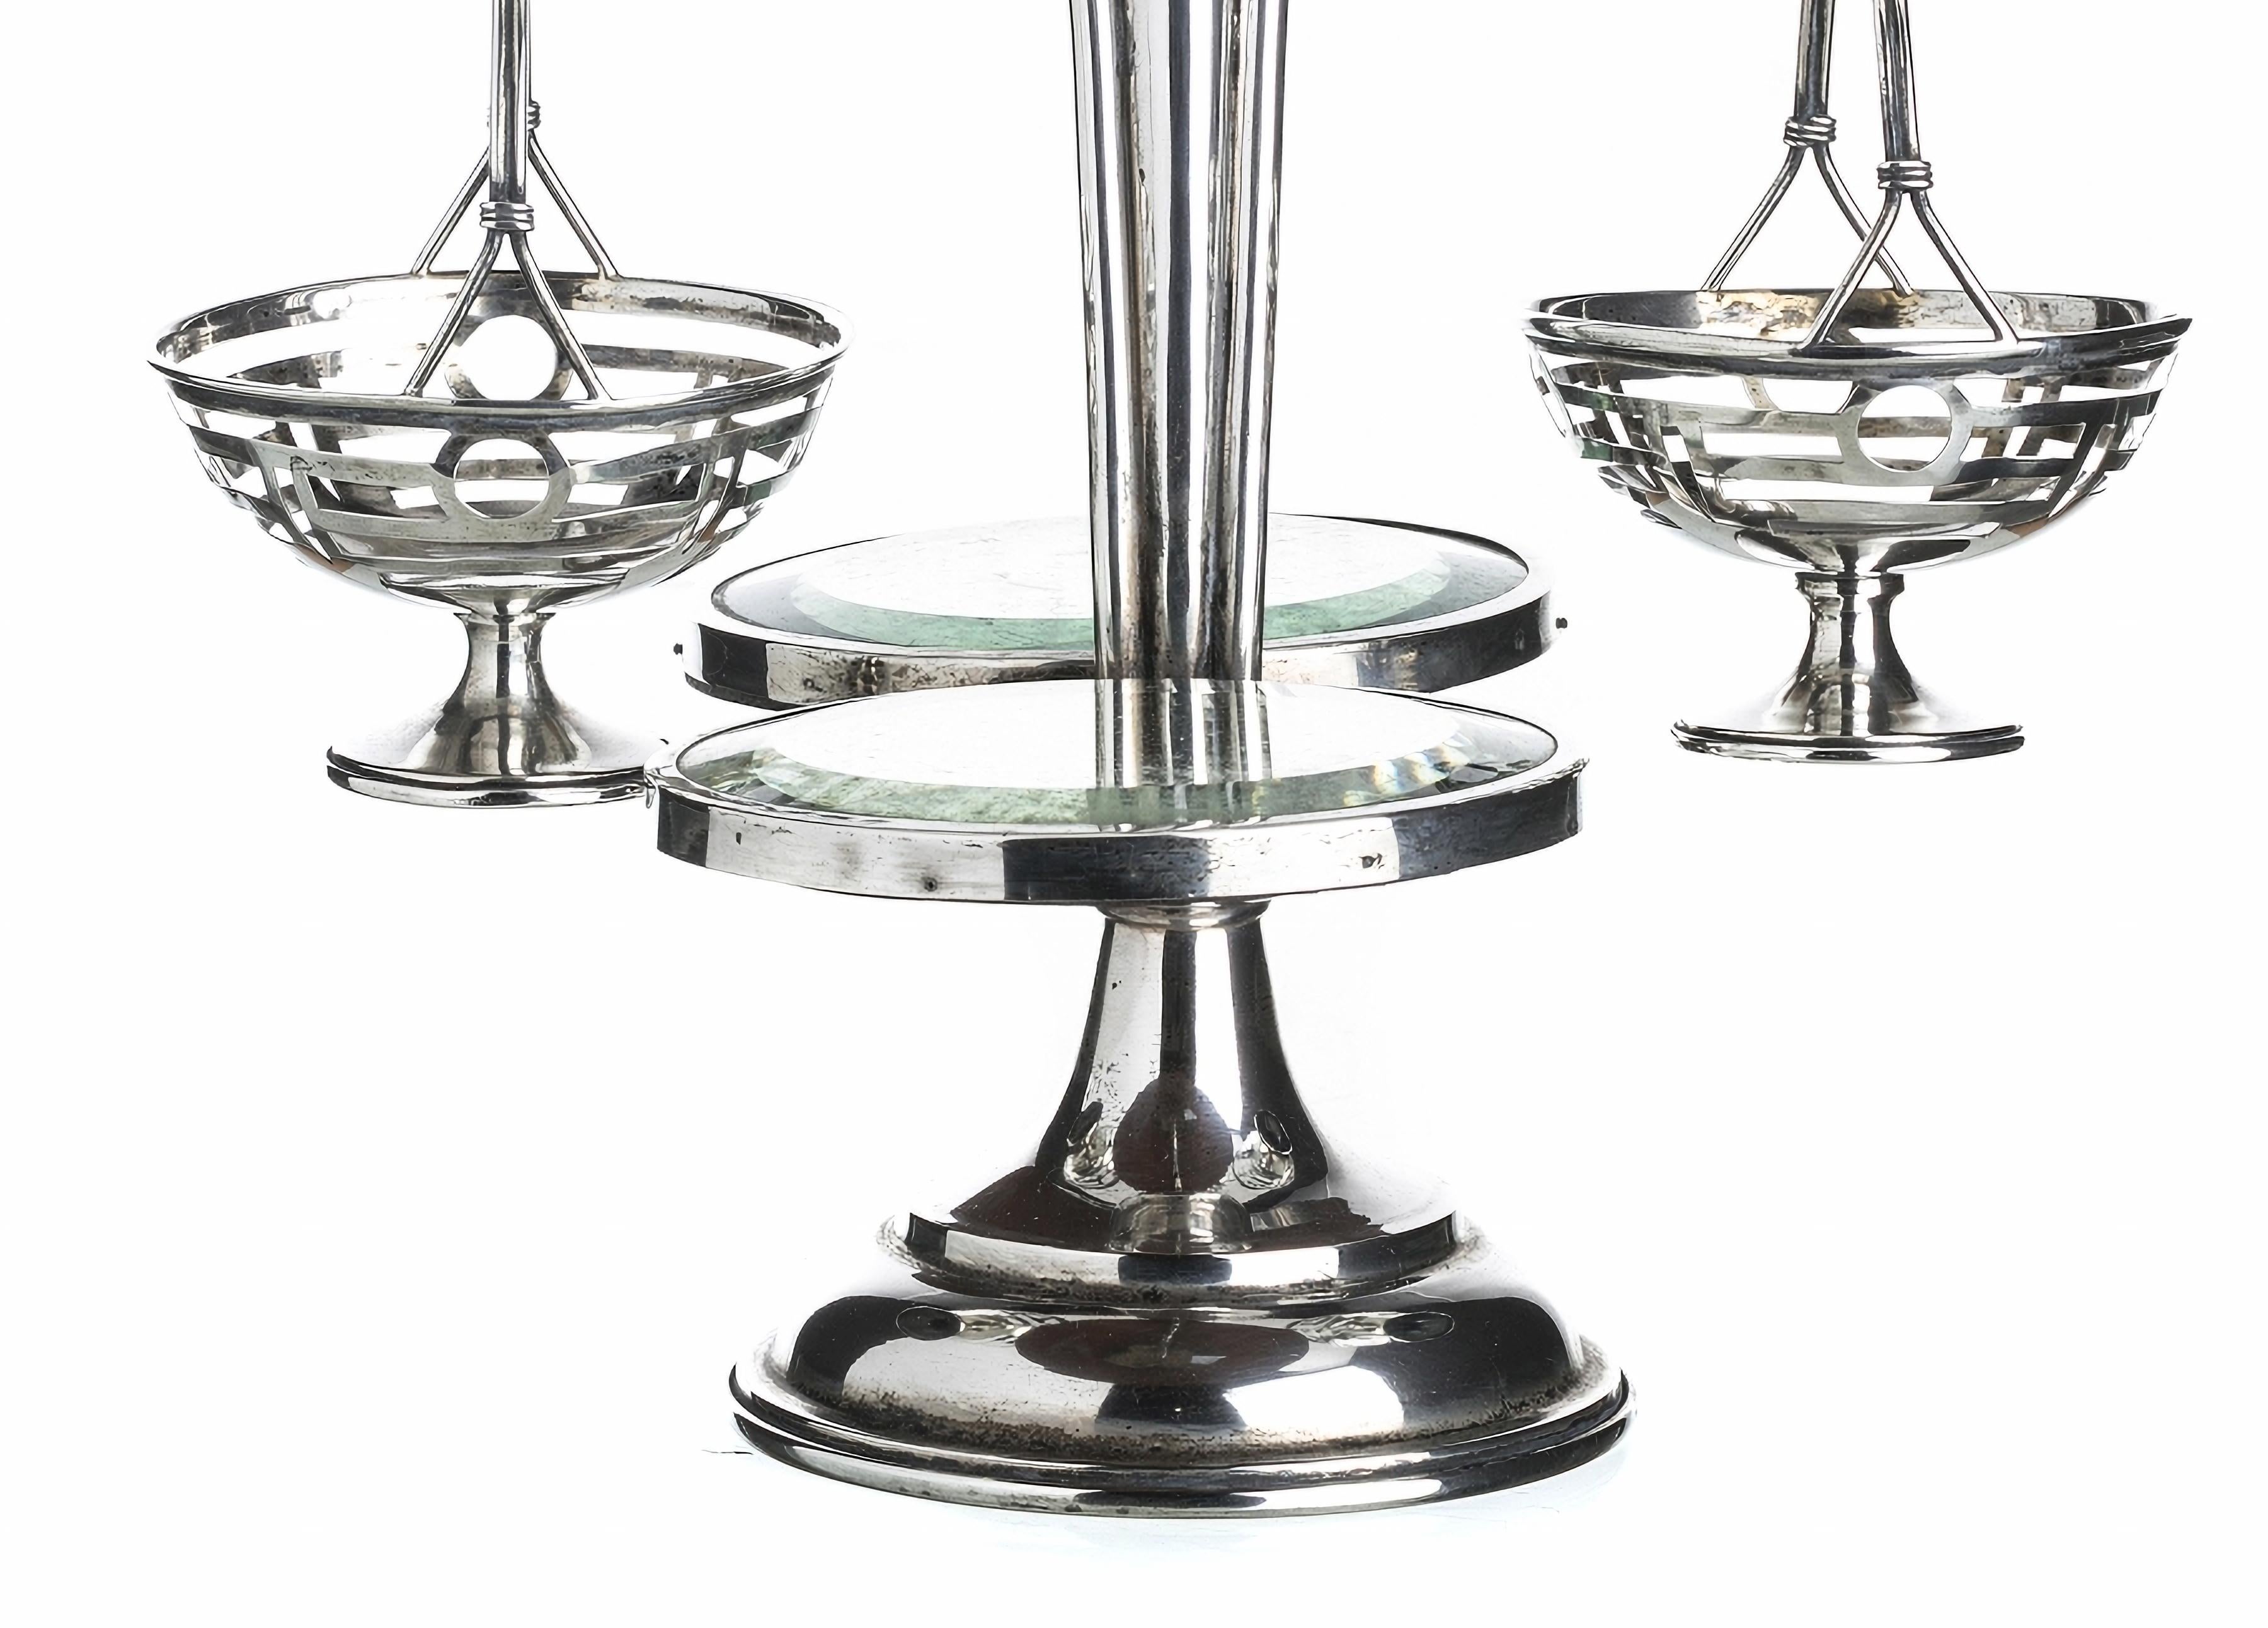 ART DECO SILVER TABLE CENTER
In silver with relief and pierced decoration with central body with two removable baskets and two bases with mirrors, 'boar II' contrast, 833 thousandths dated 1887-1937. Signs of use. Total weight approx.: 1030.4 gr.